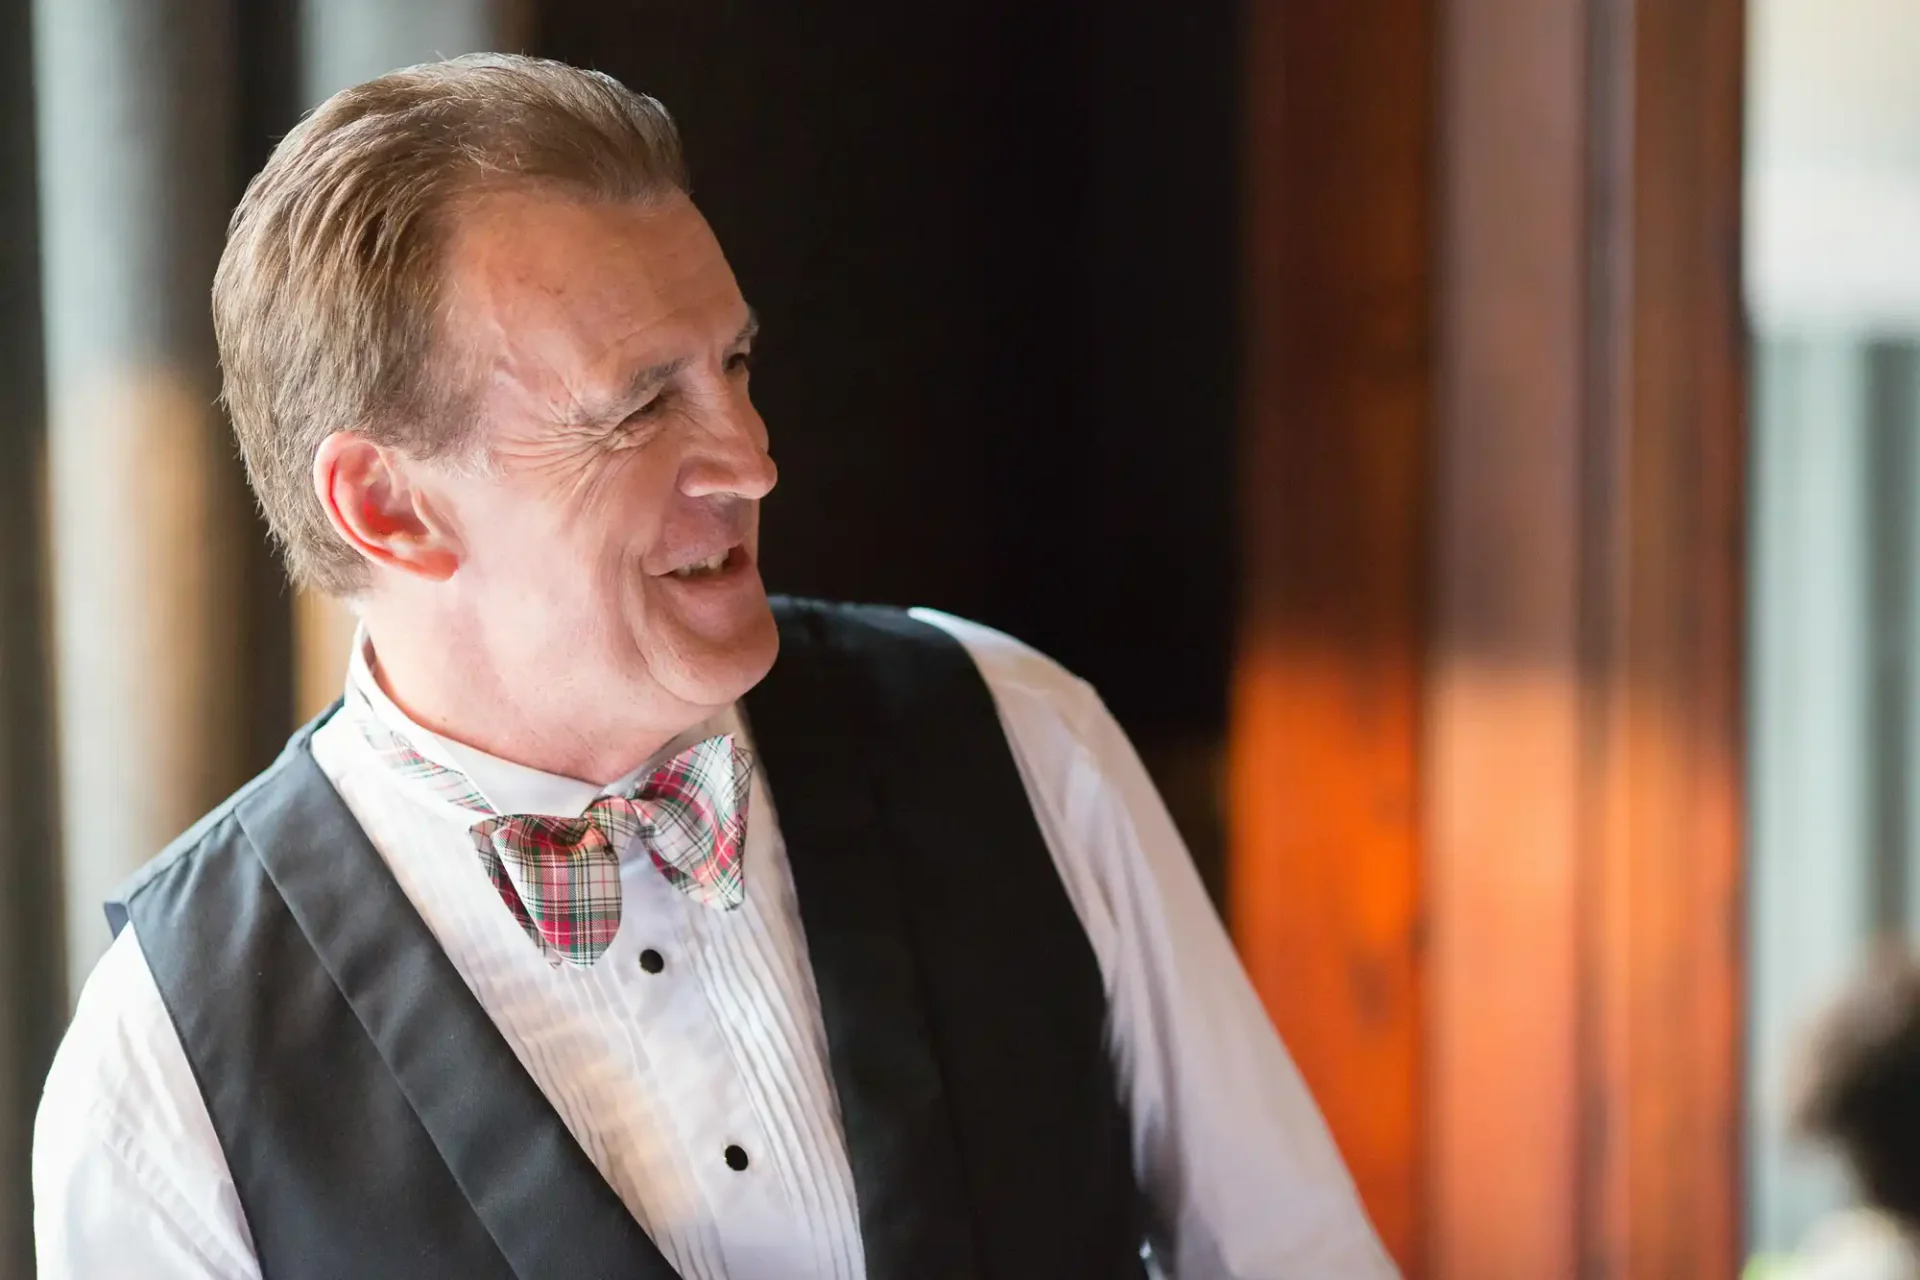 Man in a vest and bow tie smiling joyfully in a warmly lit room.